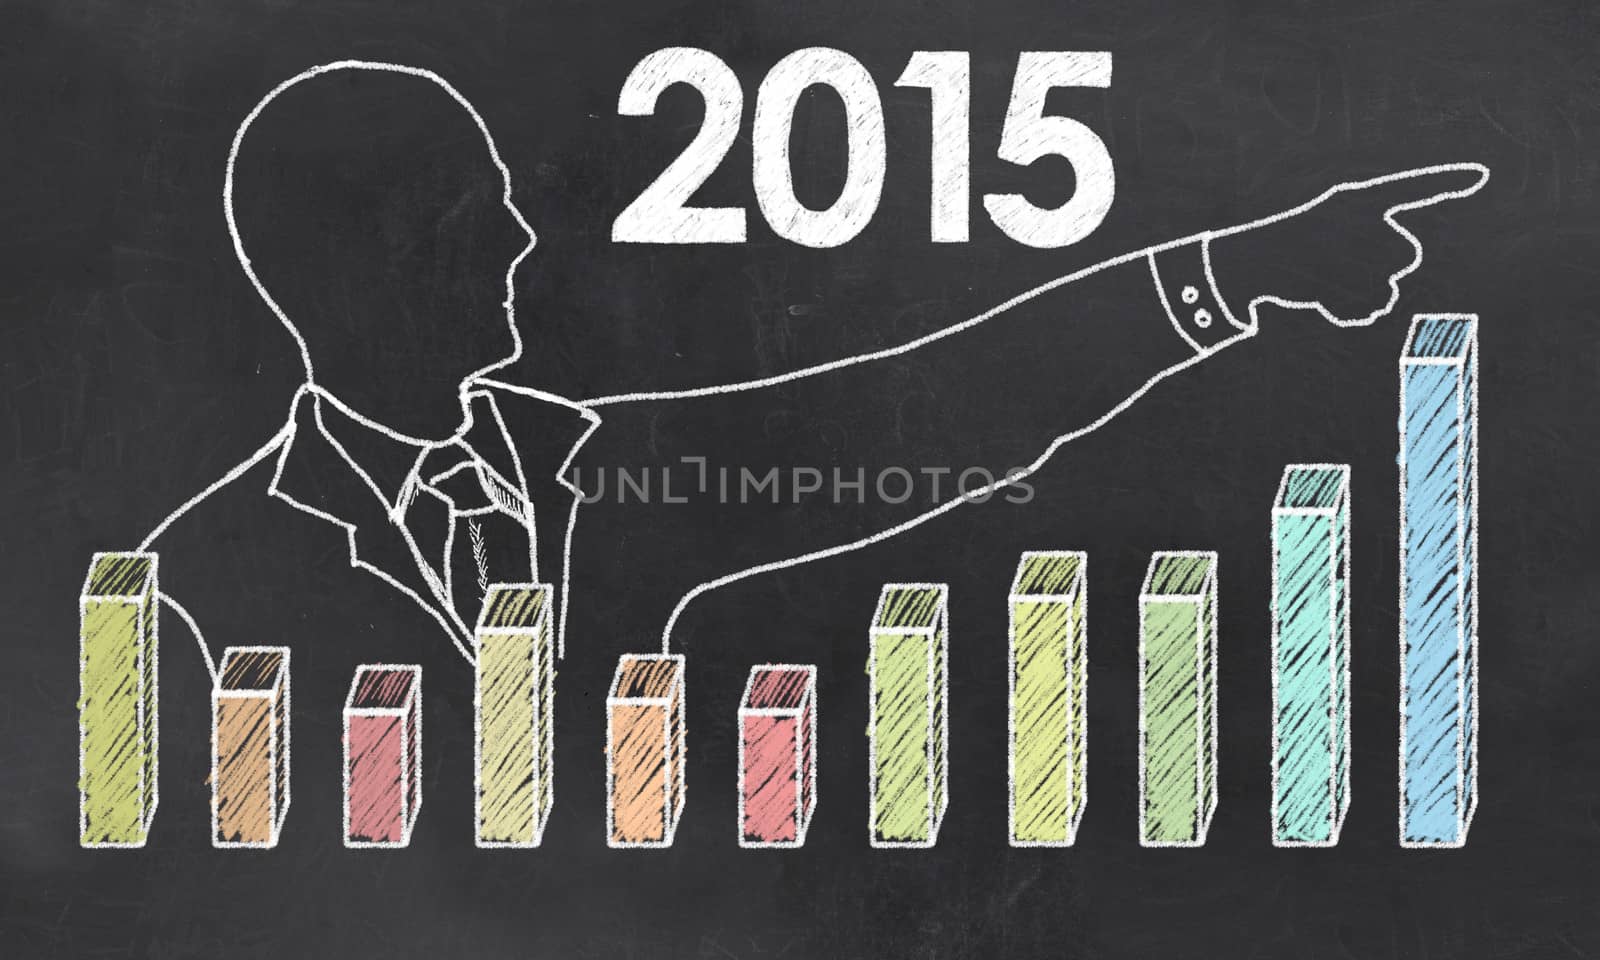 Growth in 2015 with Creative Businessman